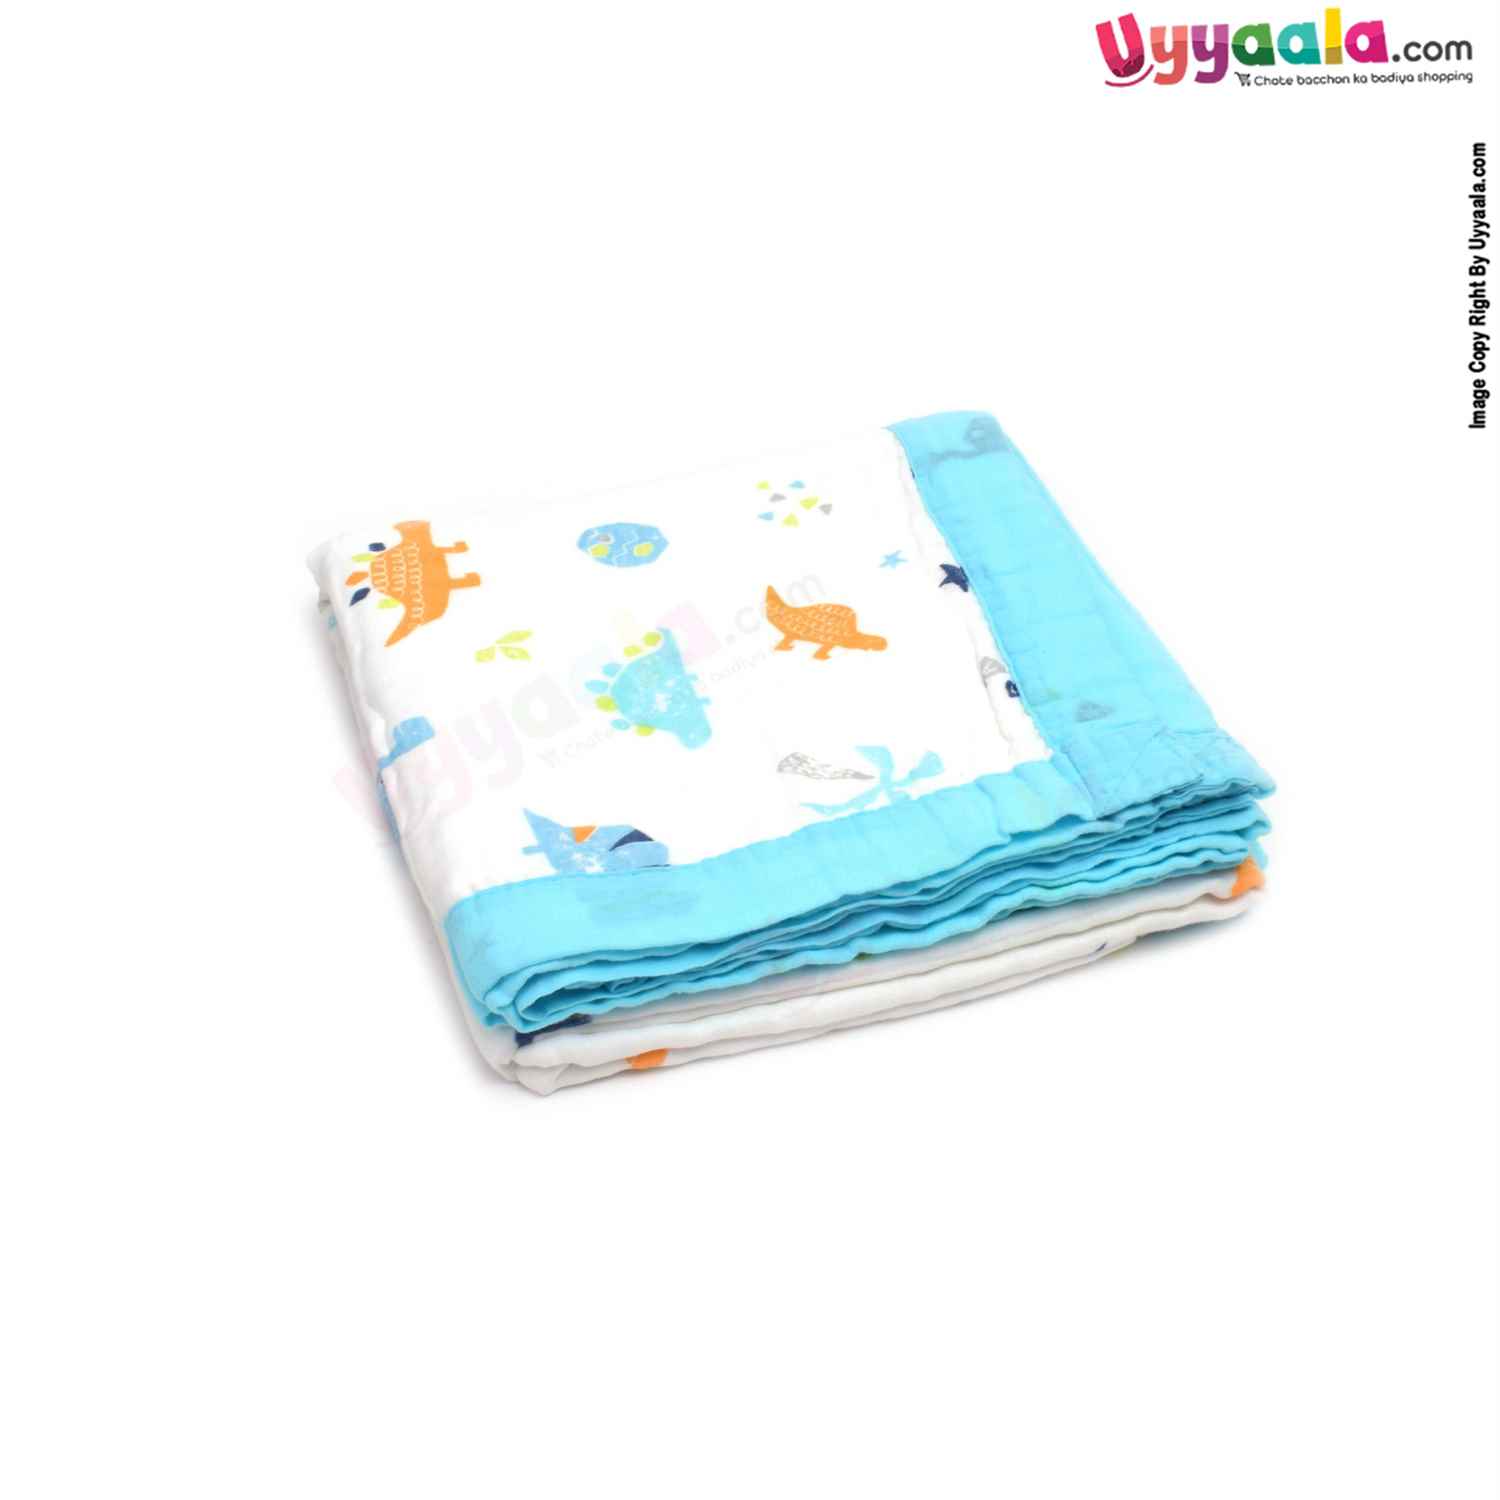 Four Layered Muslin Cotton Wrapper with Border, Dinos Print for Babies 0+m Age, Size (113*101cm)-White & Blue